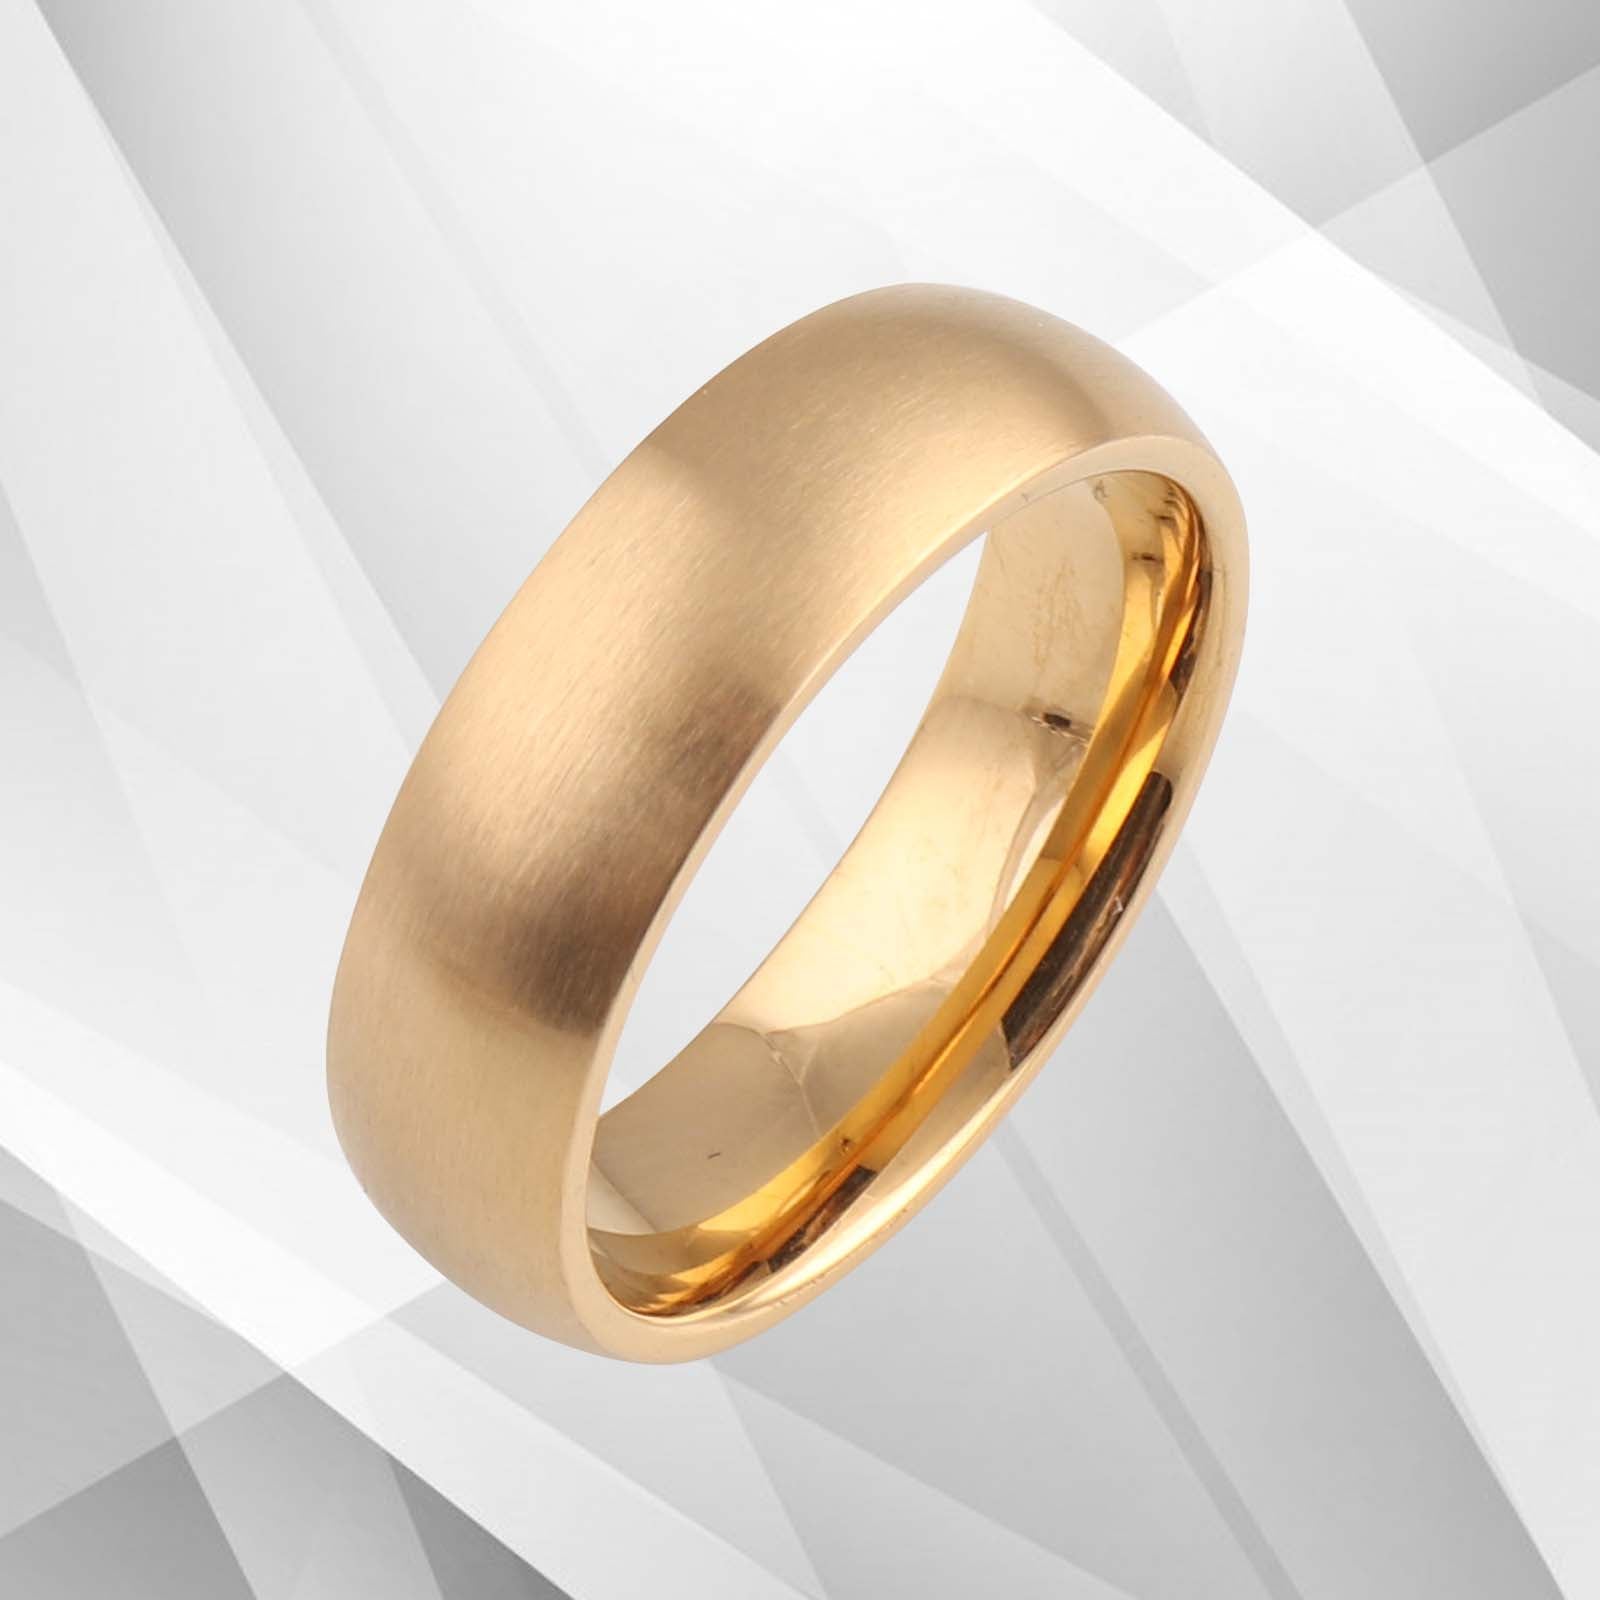 Contemporary Men's Titanium Wedding Band Ring - 18Ct Yellow Gold Plated, 7mm Wide D-Shape Comfort Fit, Handmade Bijou Her